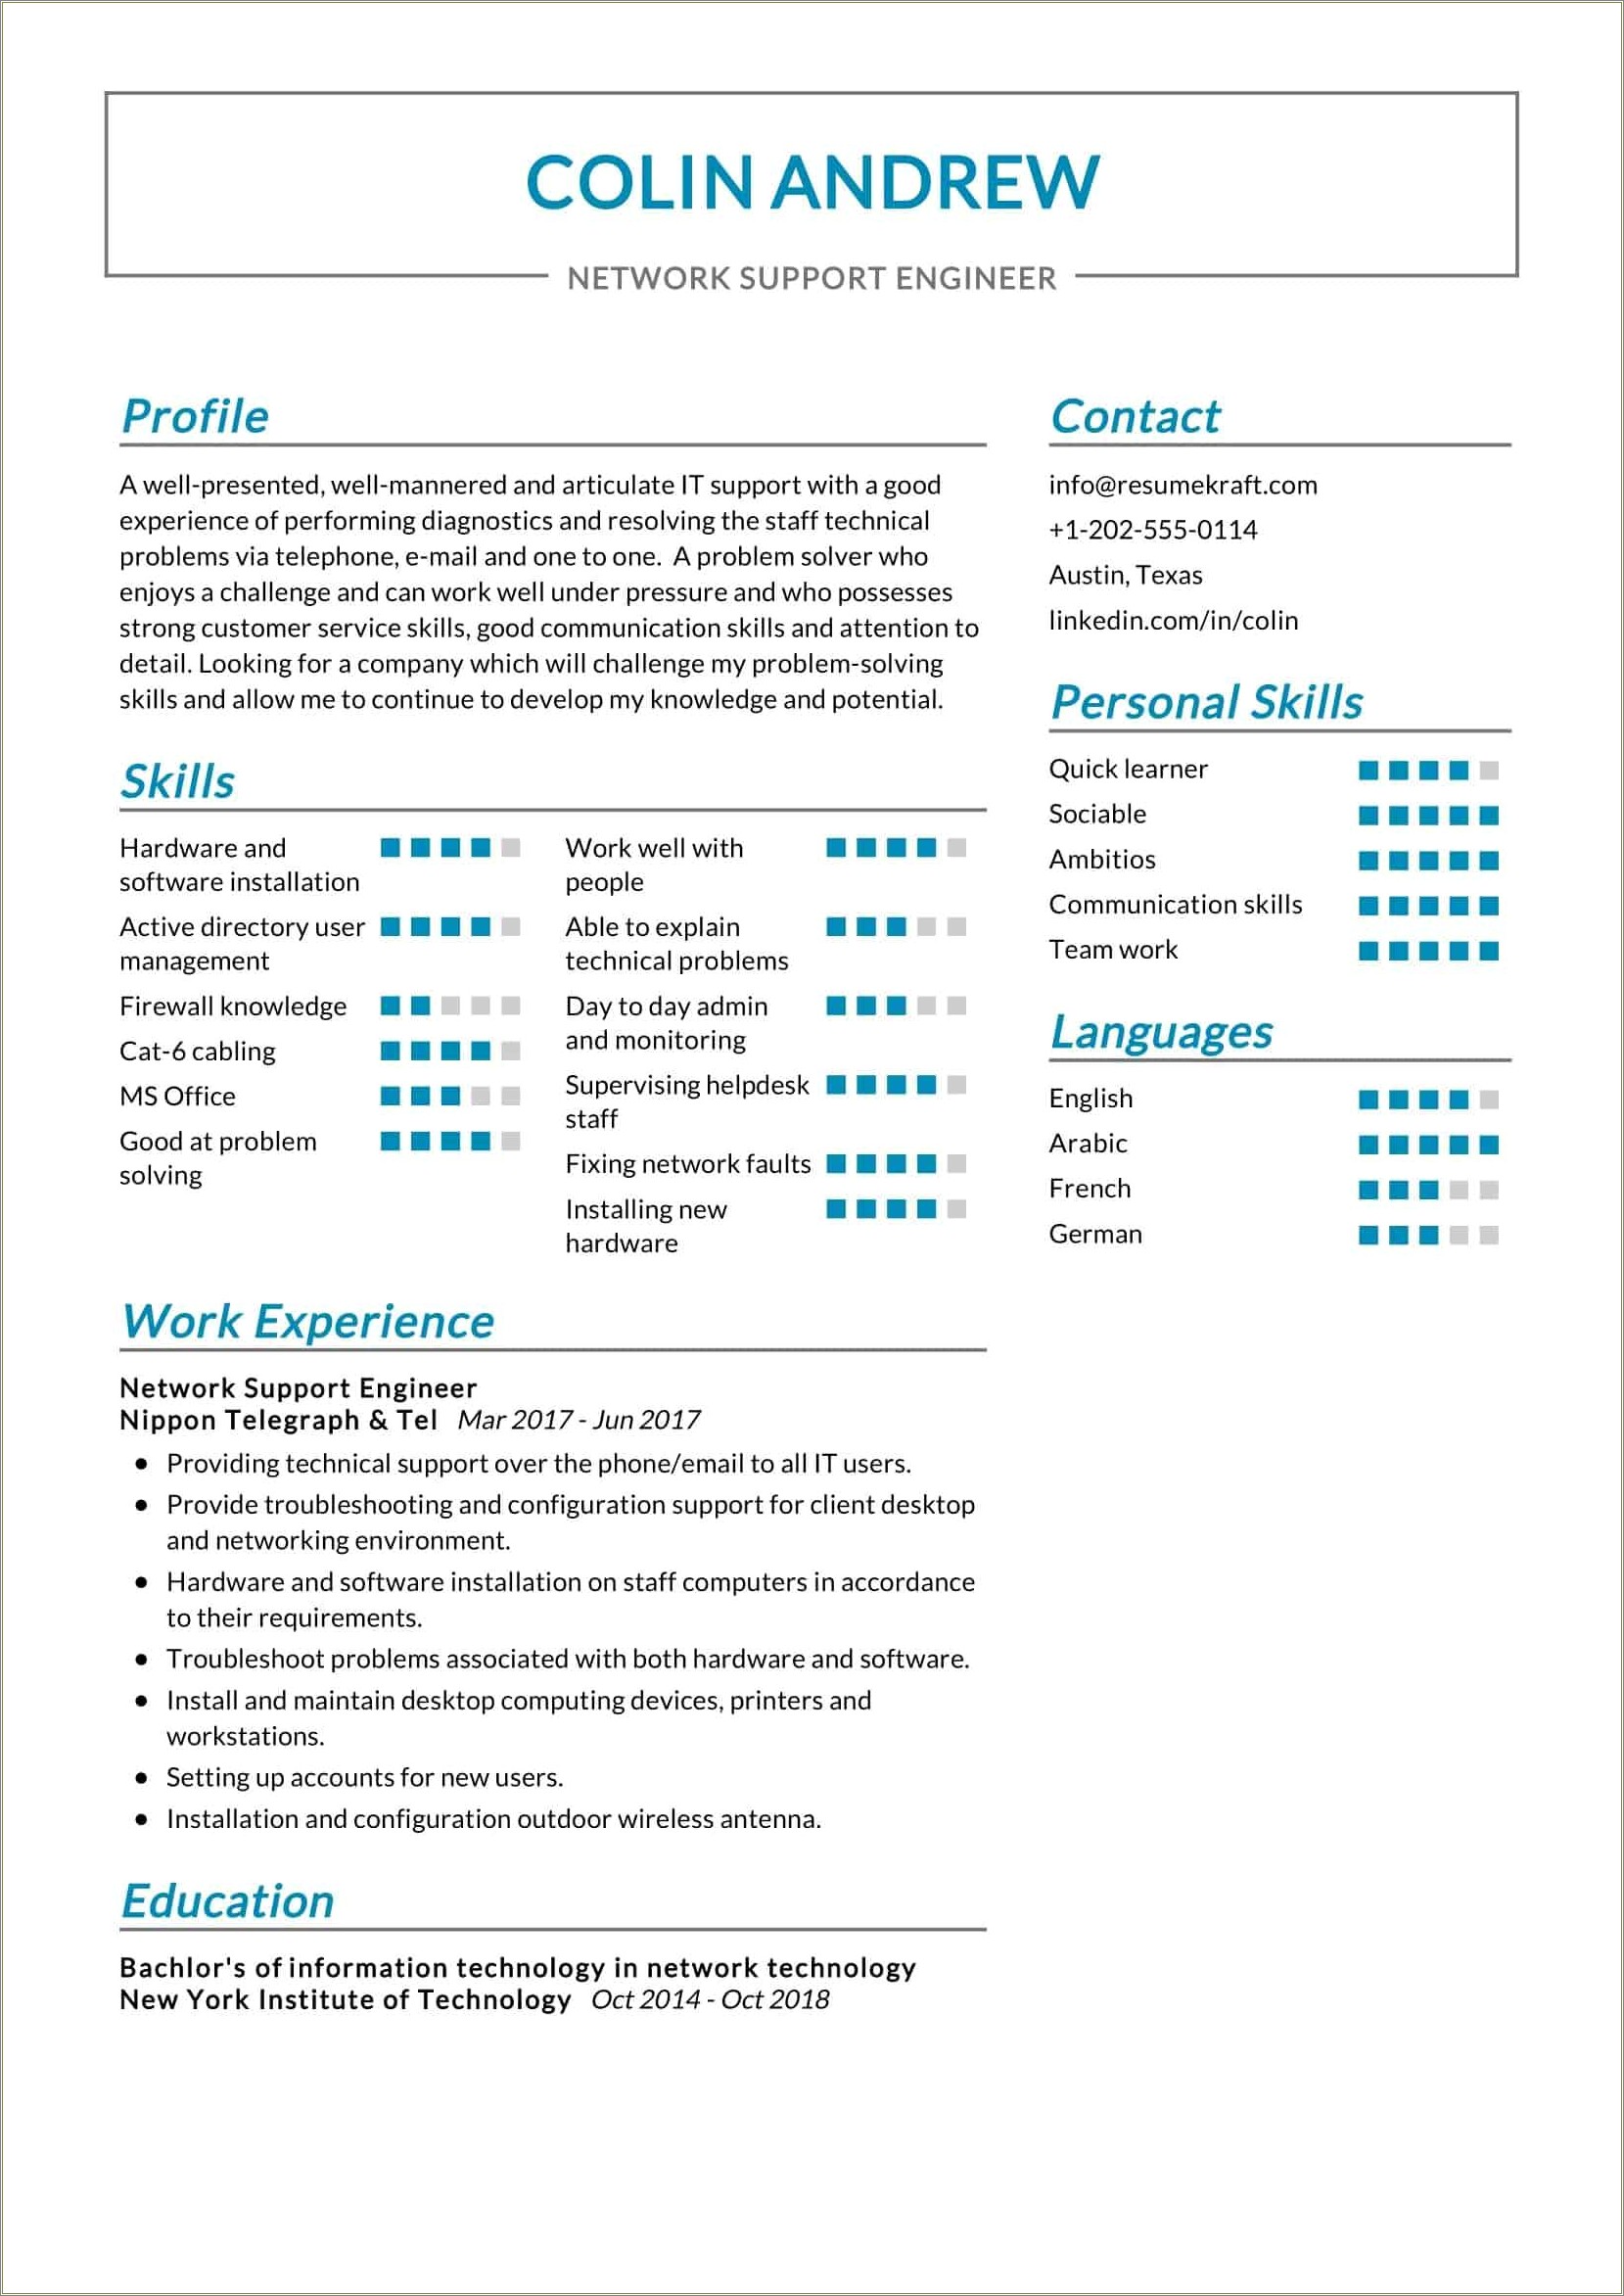 Hardware And Networking Resume Sample